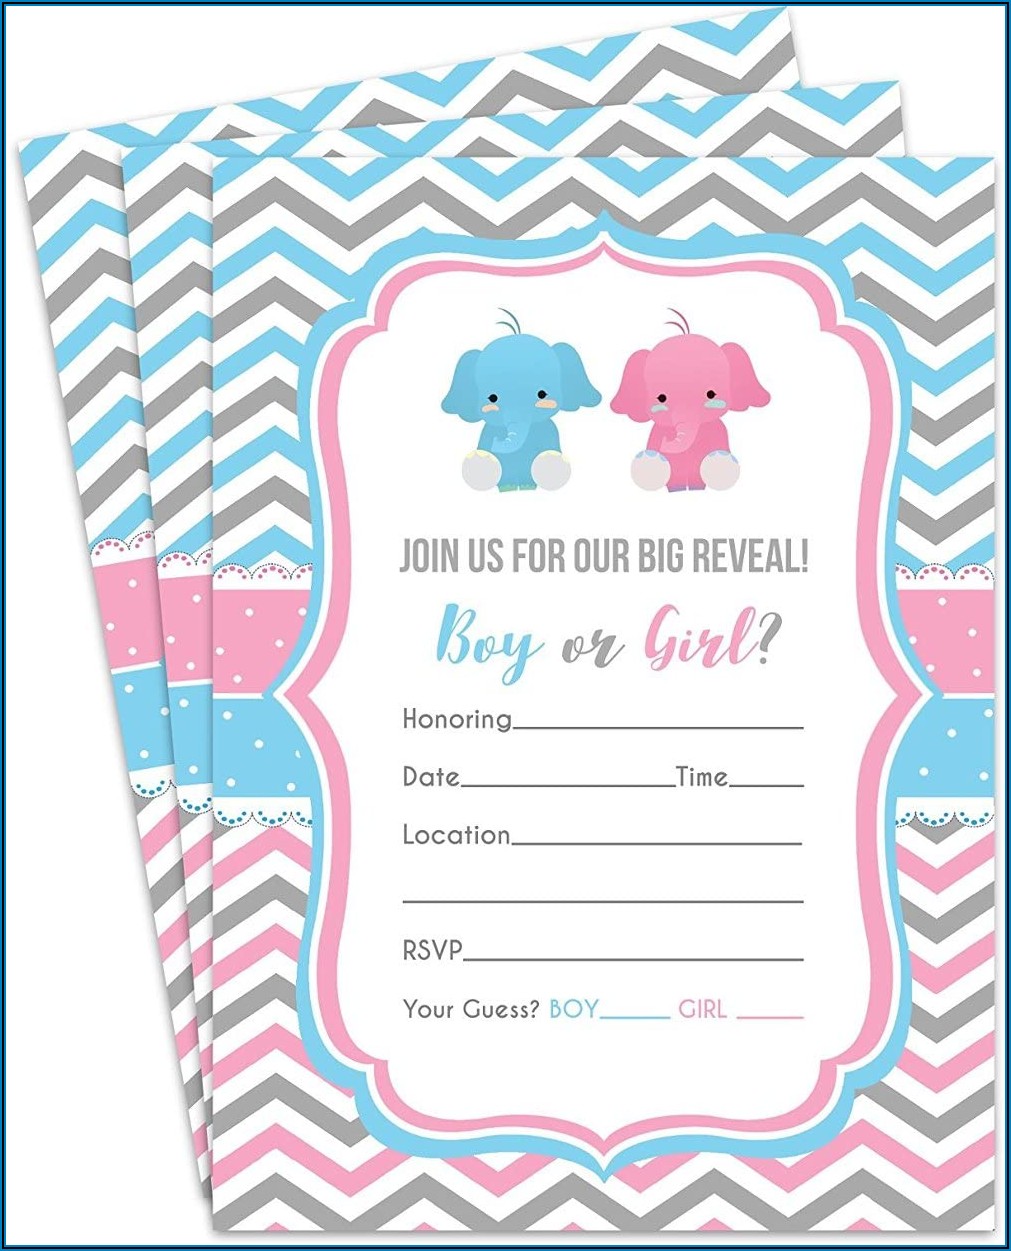 Fill In The Blank Gender Reveal Invitations